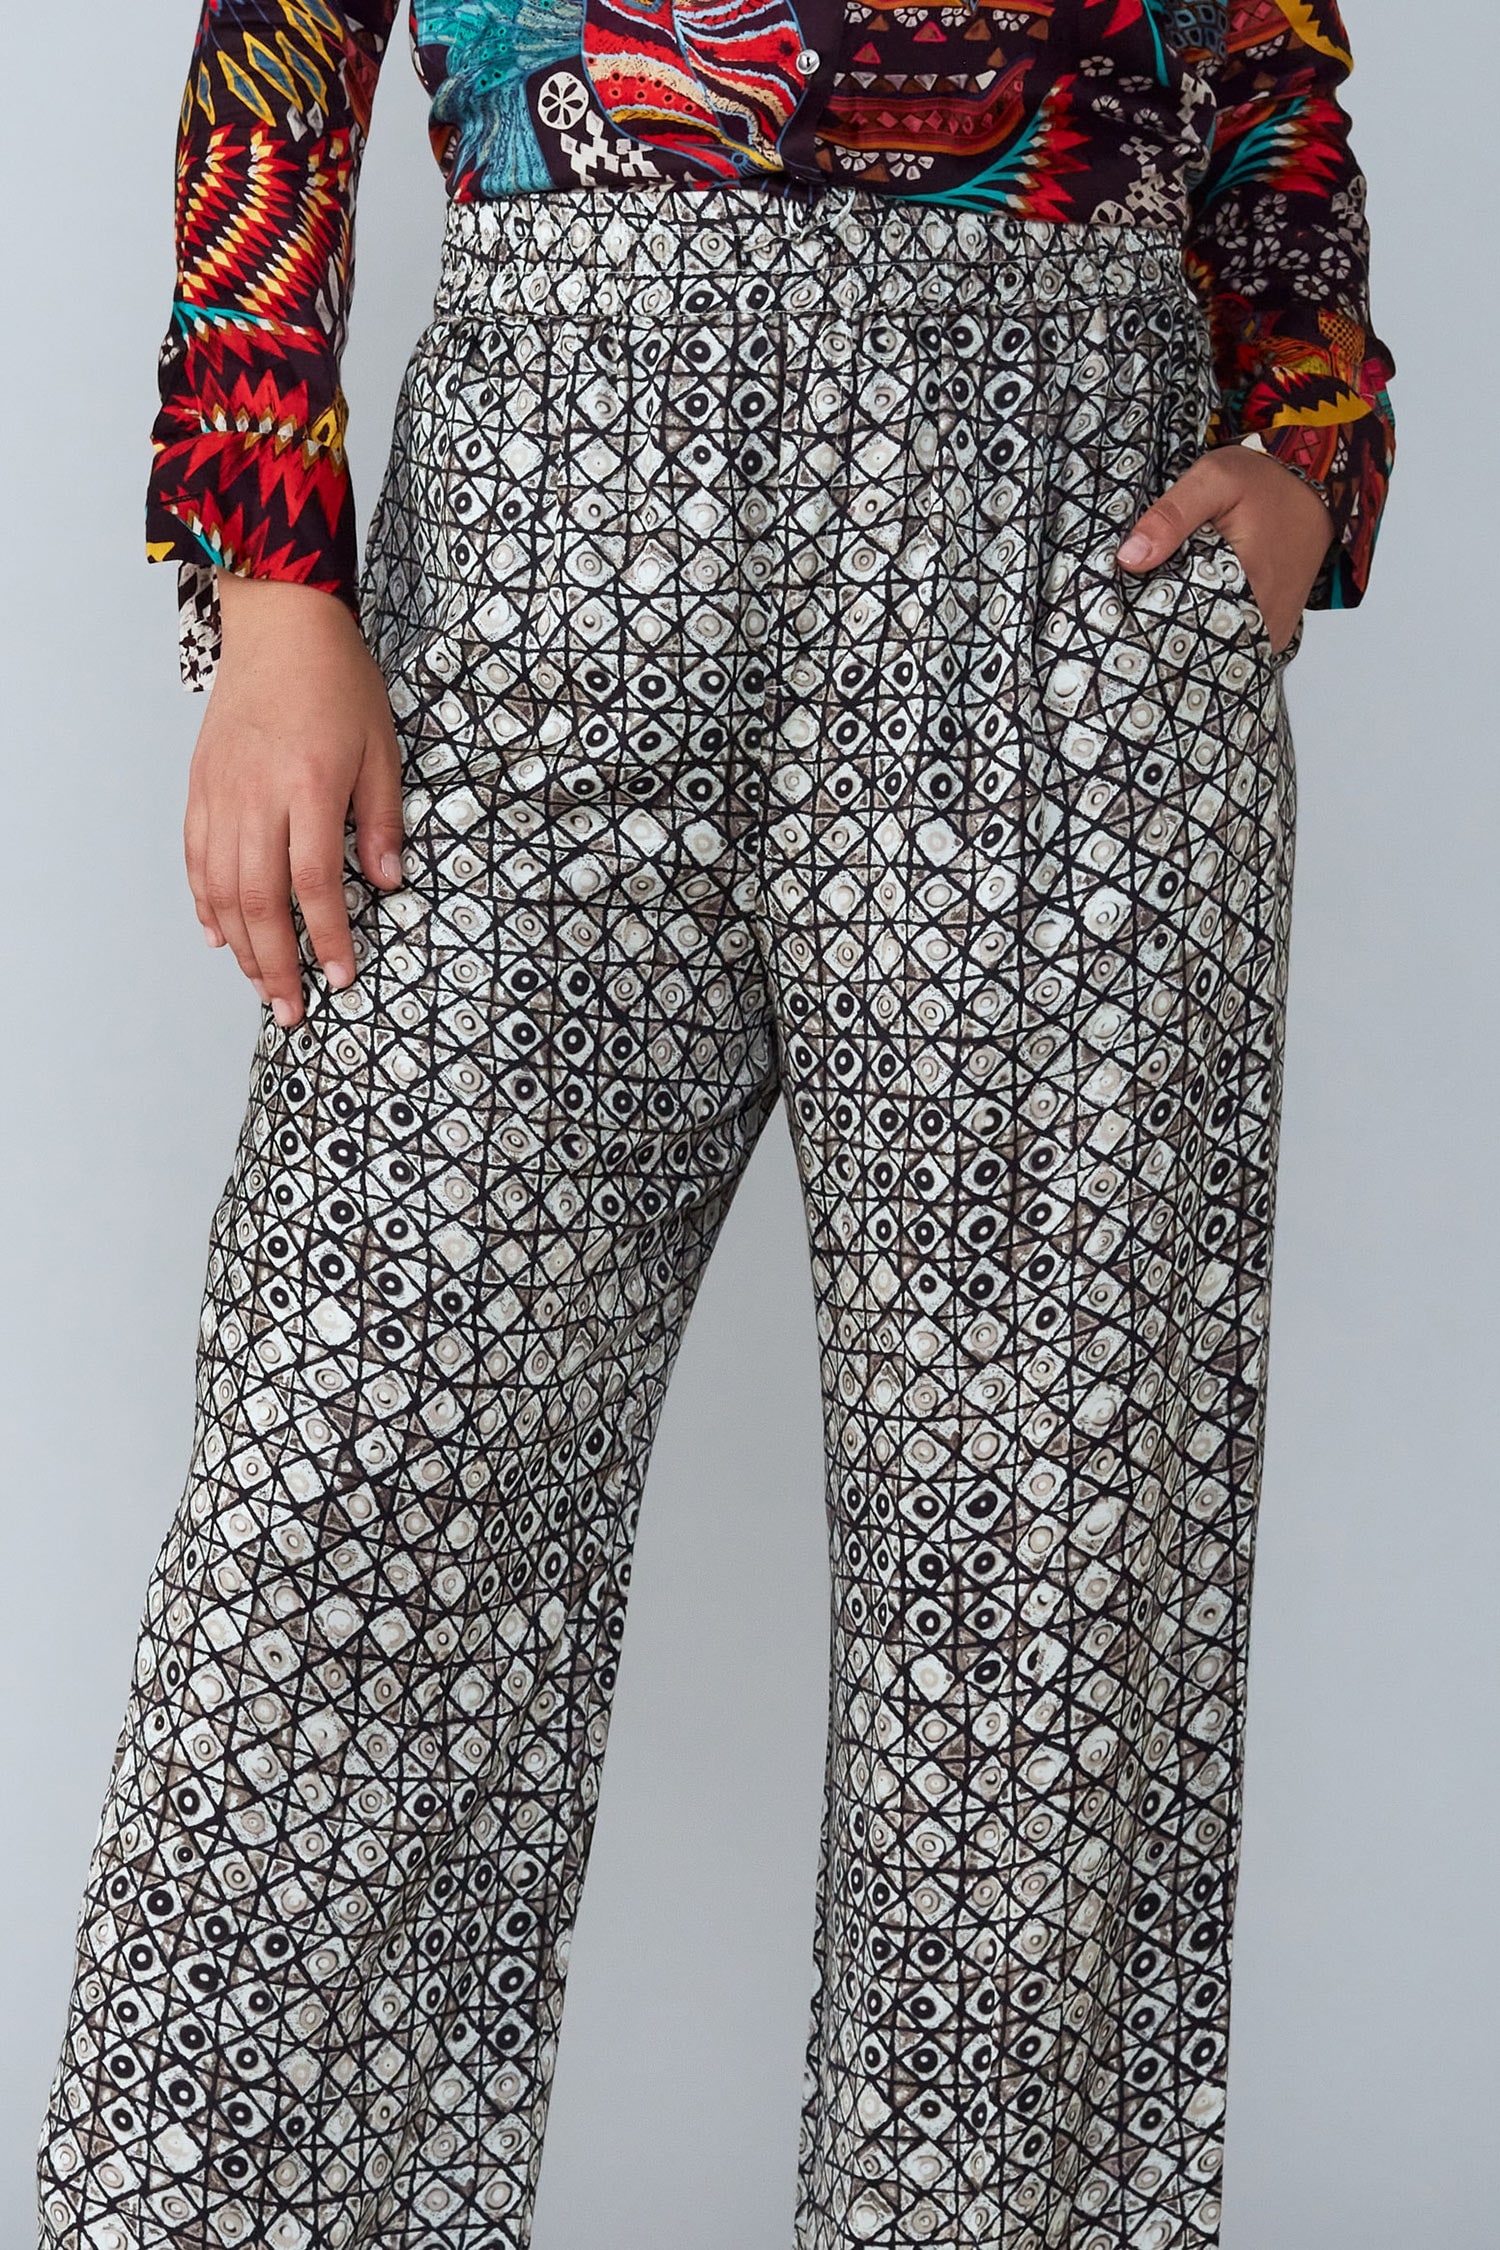 Womens Cotton Printed PantTrouser